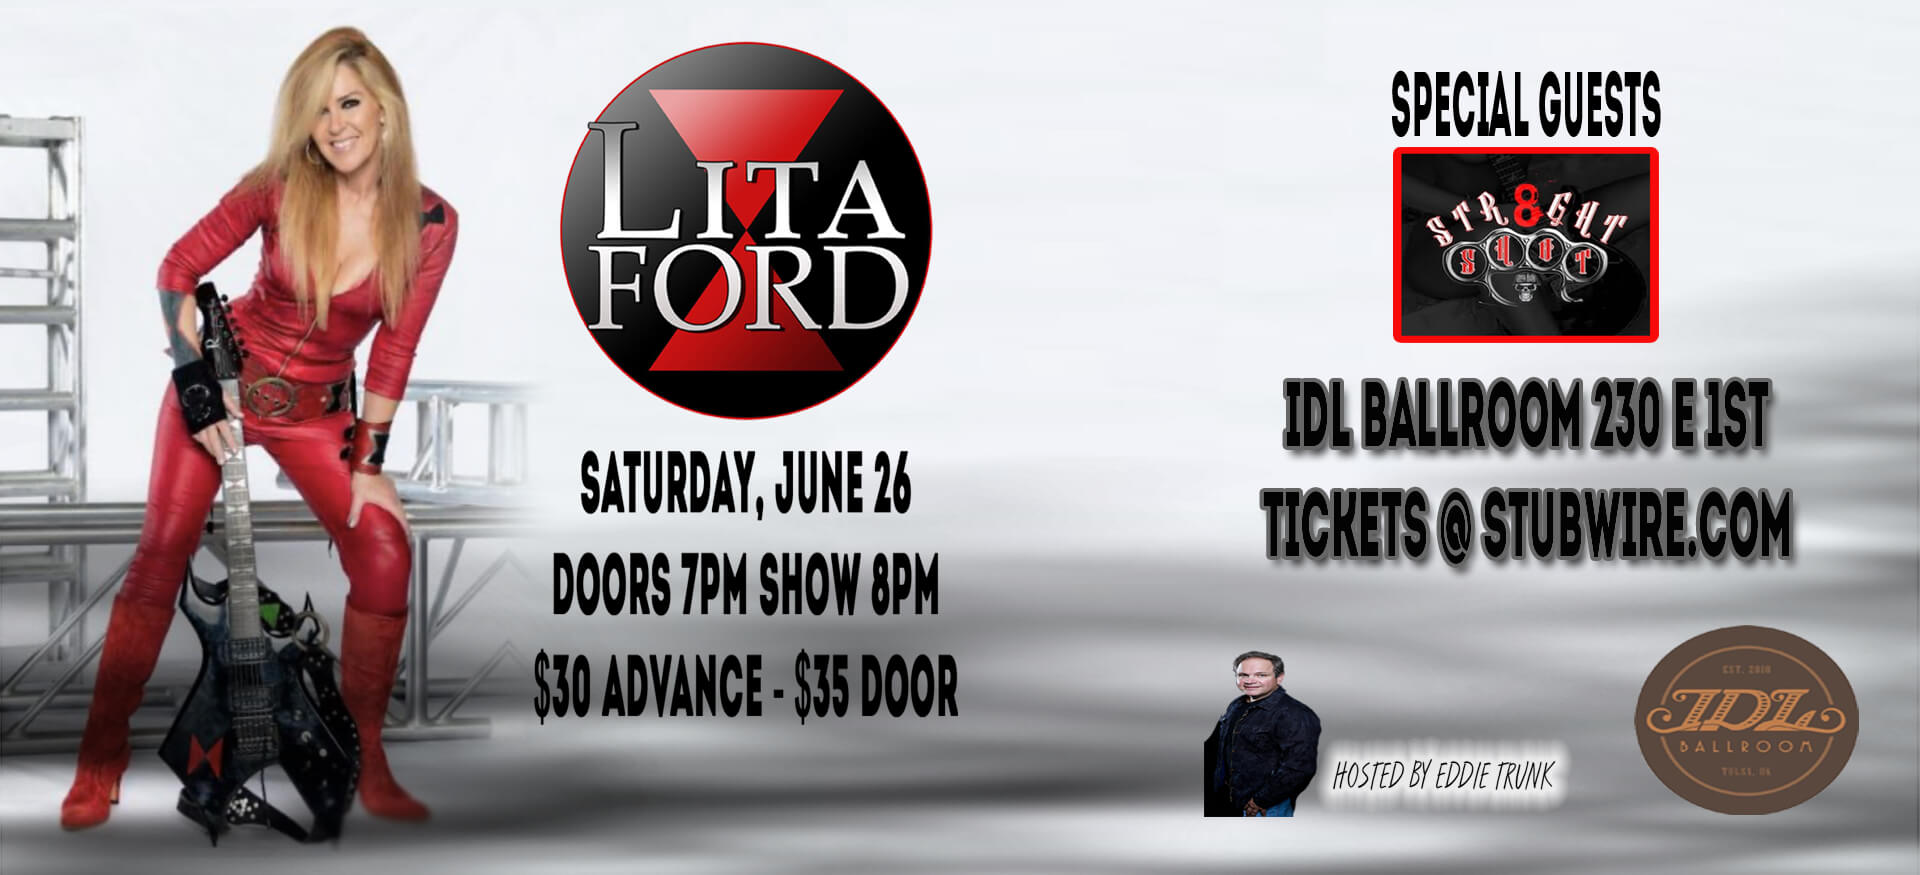 Lita Ford w/ special guests Str8ght Shot